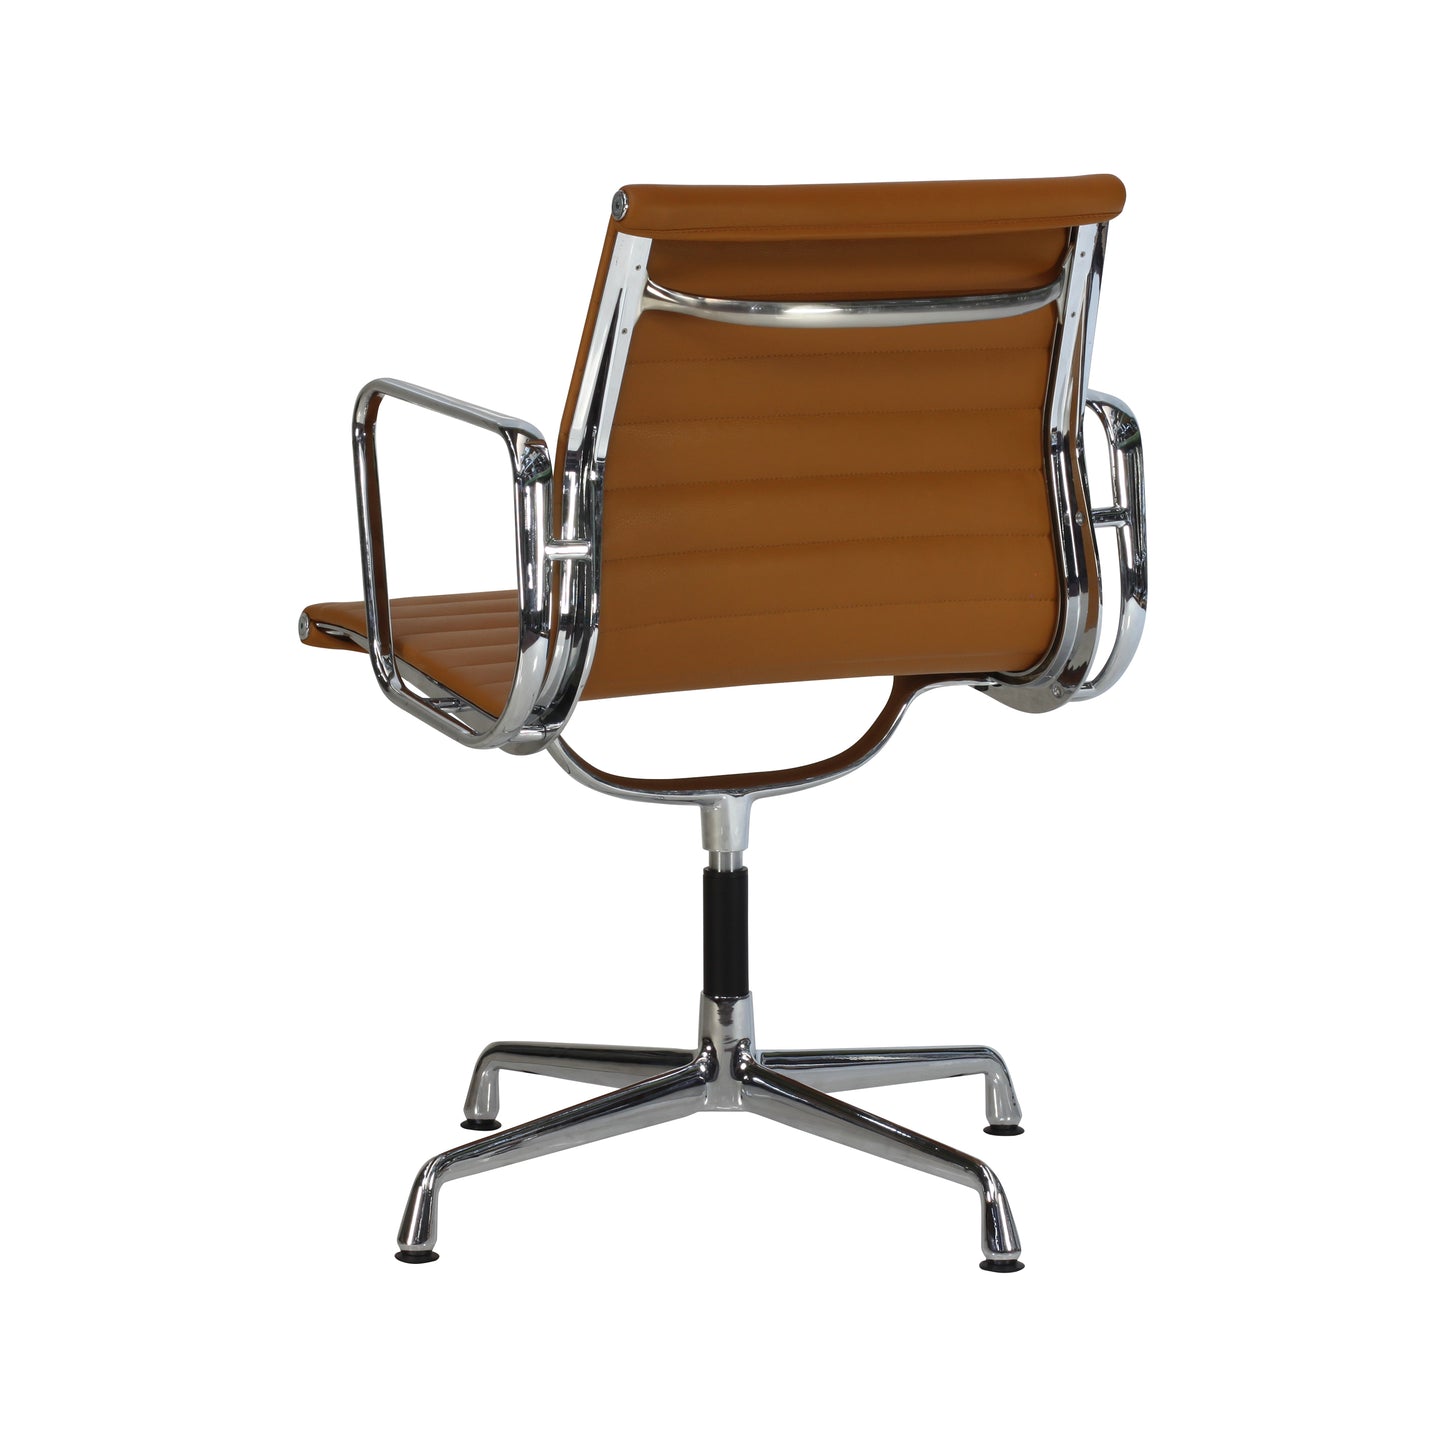 Chair without wheels aluminium style | Cognac Leather | Back